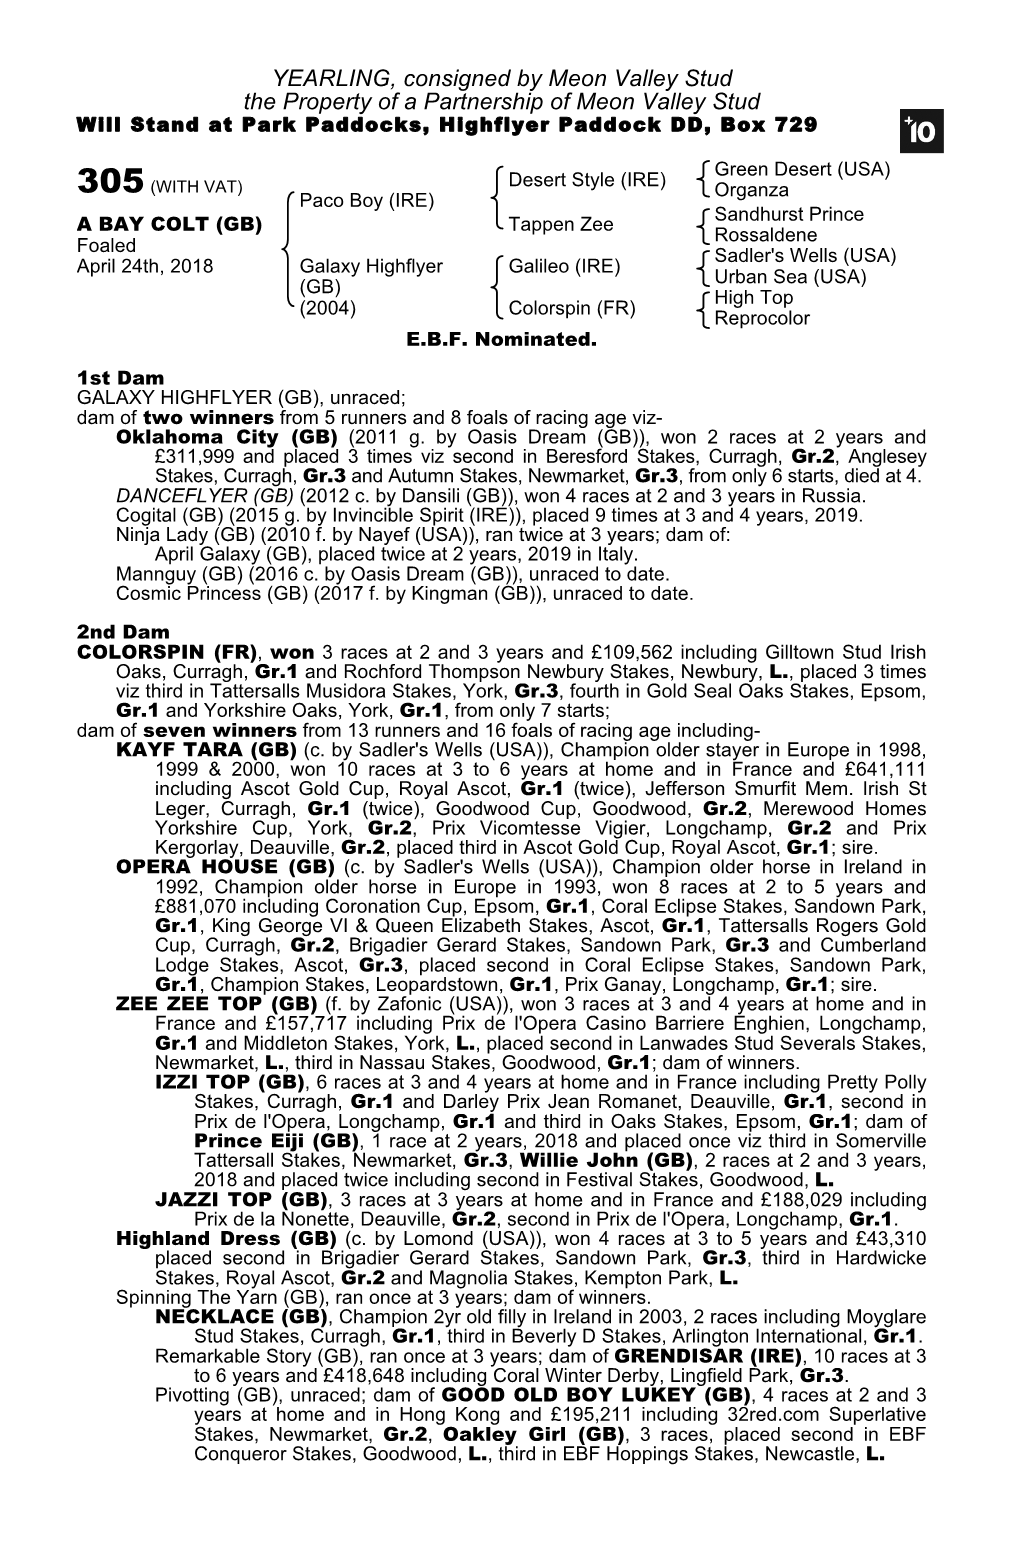 YEARLING, Consigned by Meon Valley Stud the Property of a Partnership of Meon Valley Stud Will Stand at Park Paddocks, Highflyer Paddock DD, Box 729